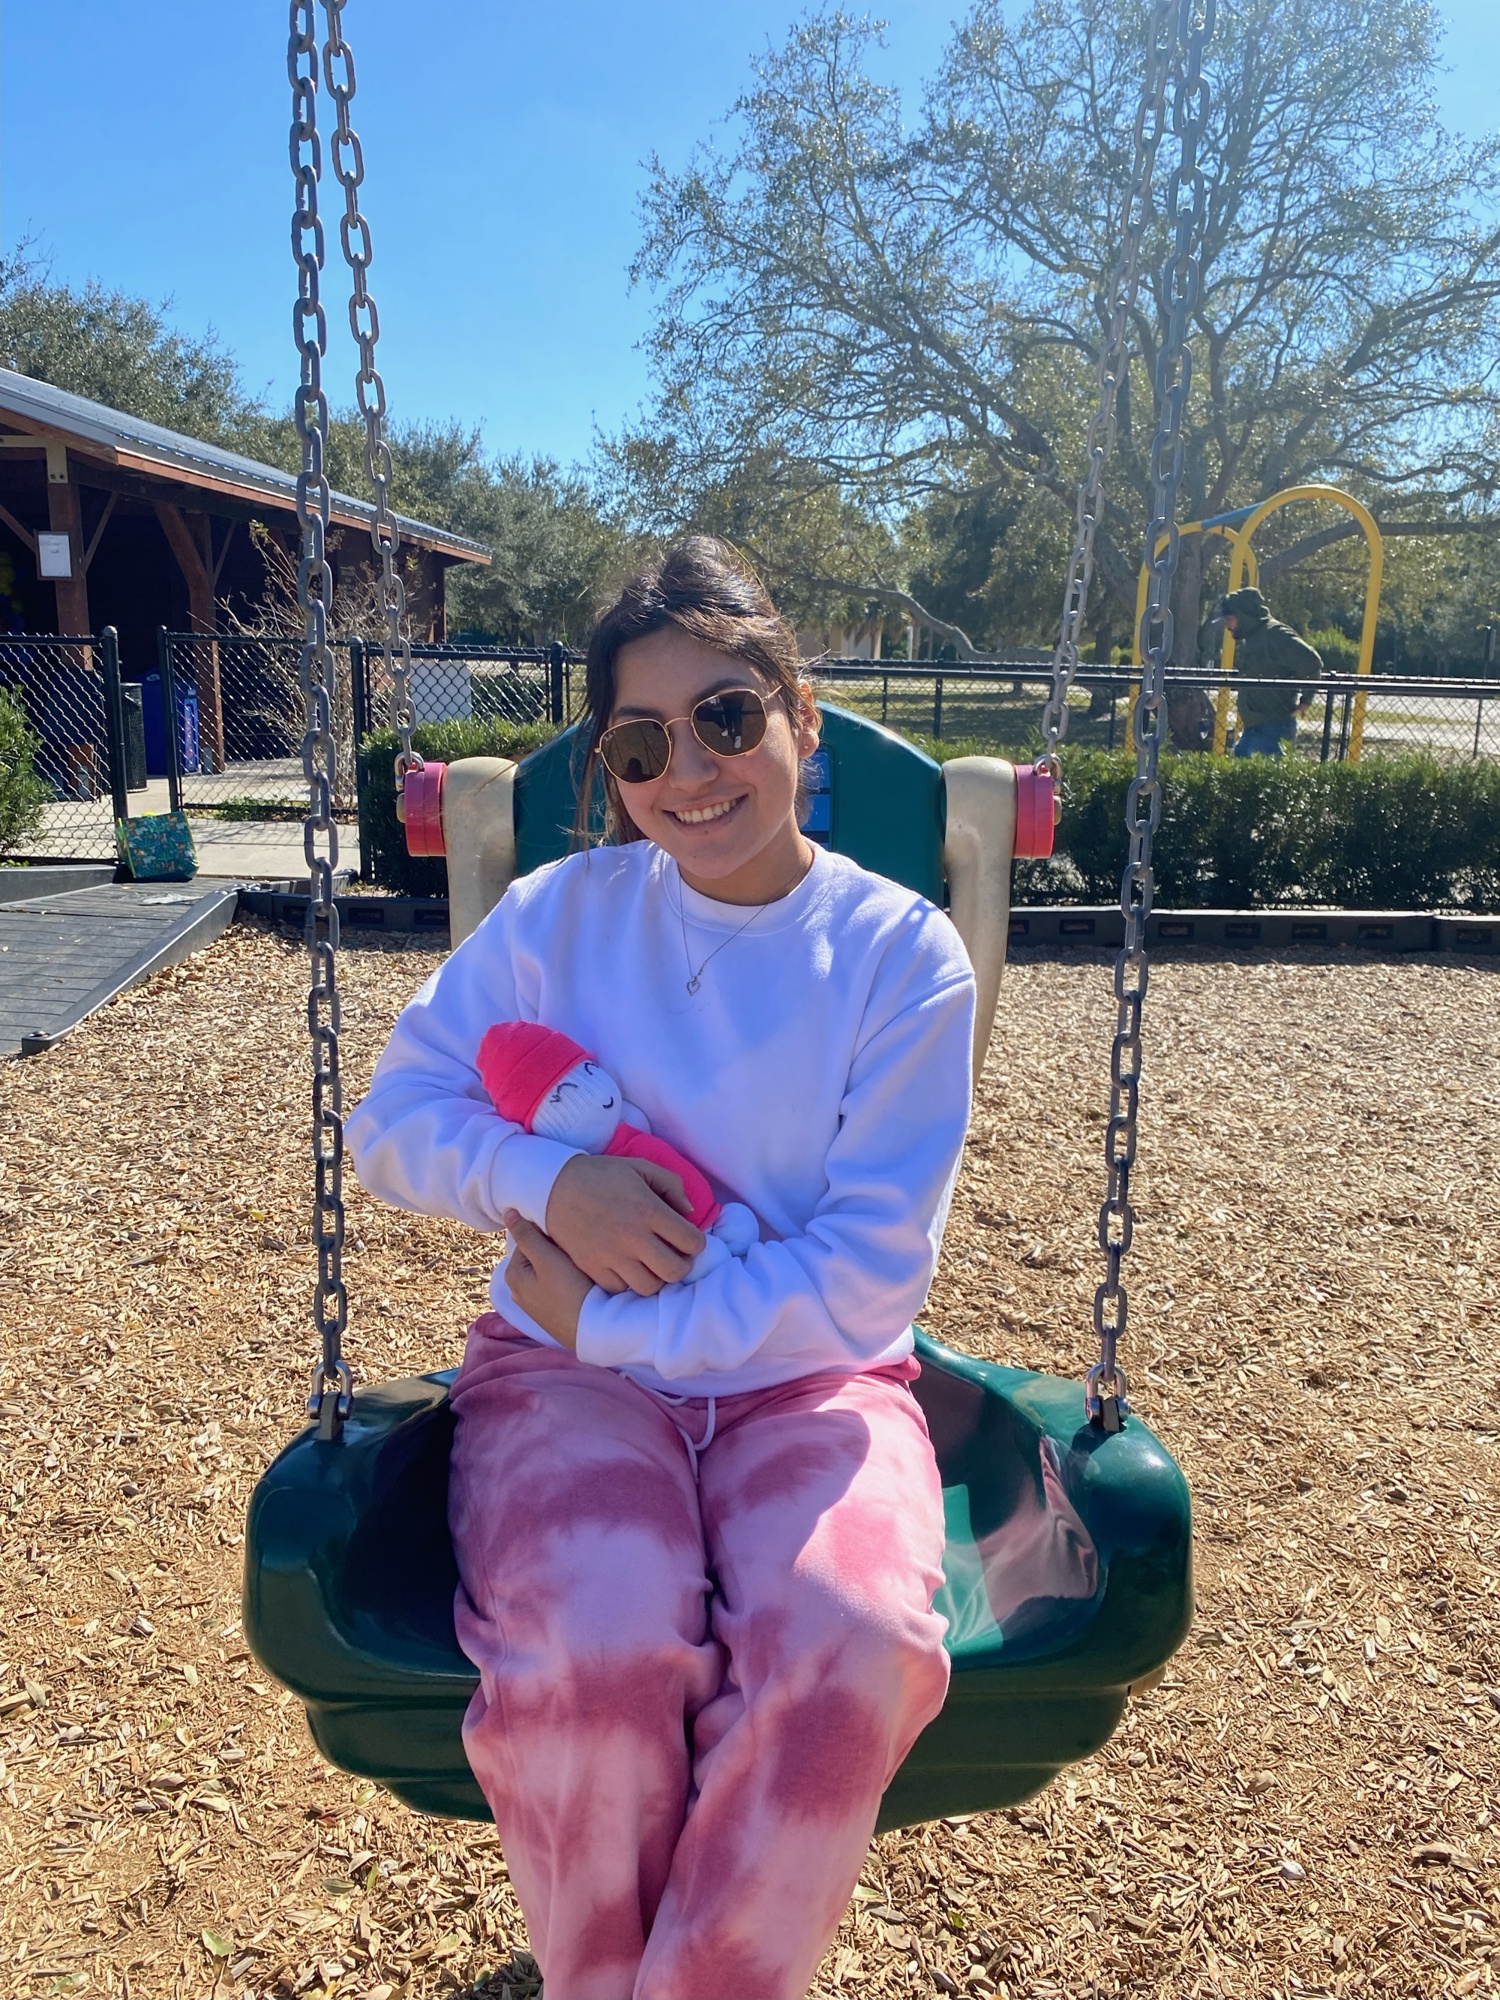 Junior Evelyn Sanchez takes her sock baby, Luna, to the park. They have a blast on the swings. Courtesy photo.